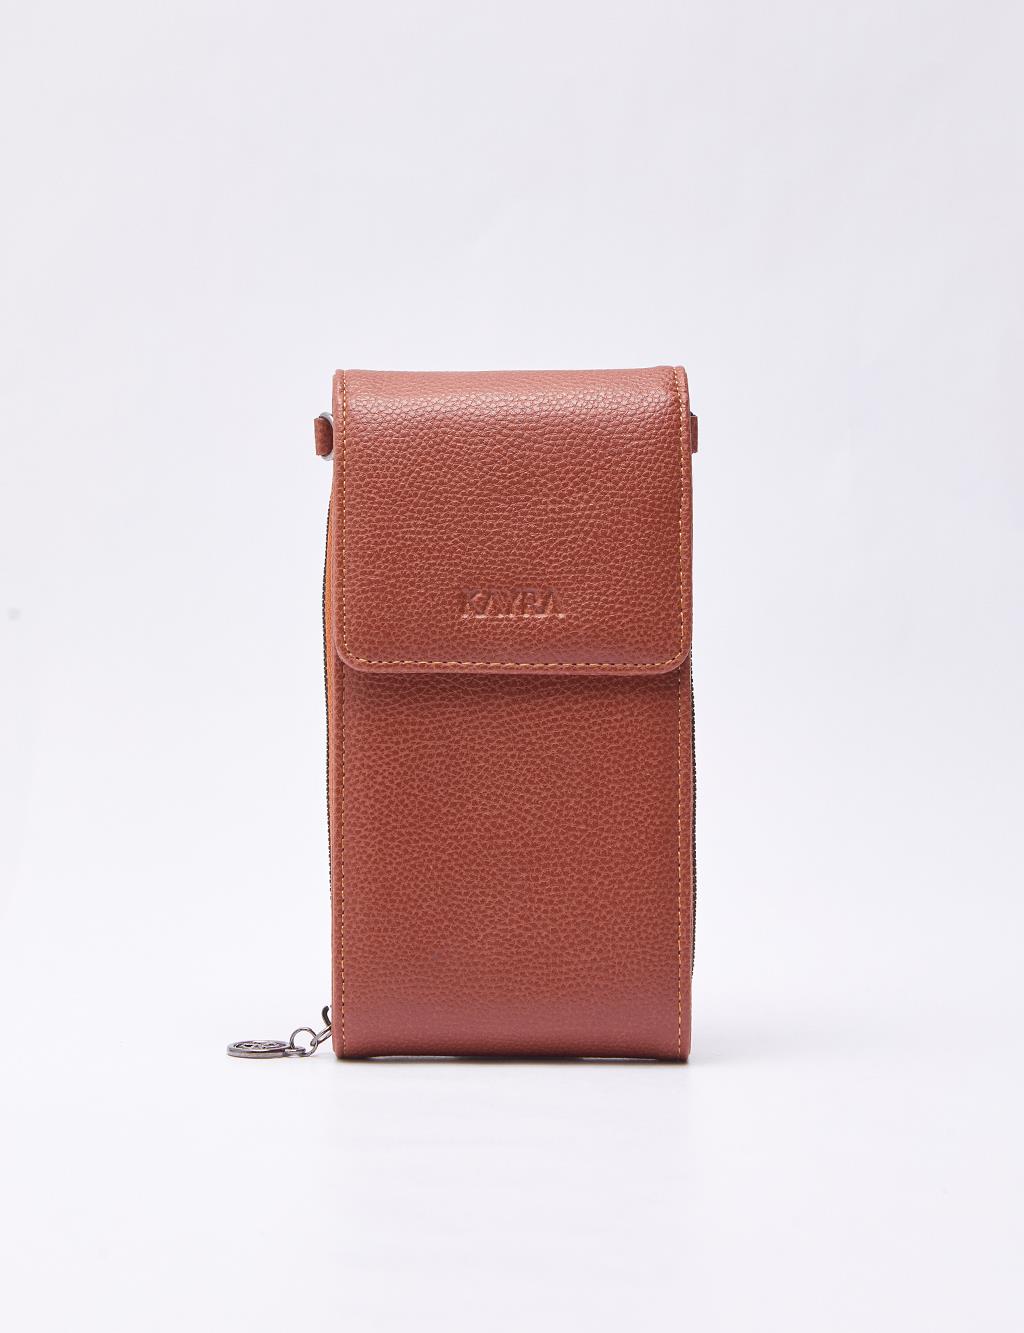 Natural Leather Covered Wallet Bag Tobacco